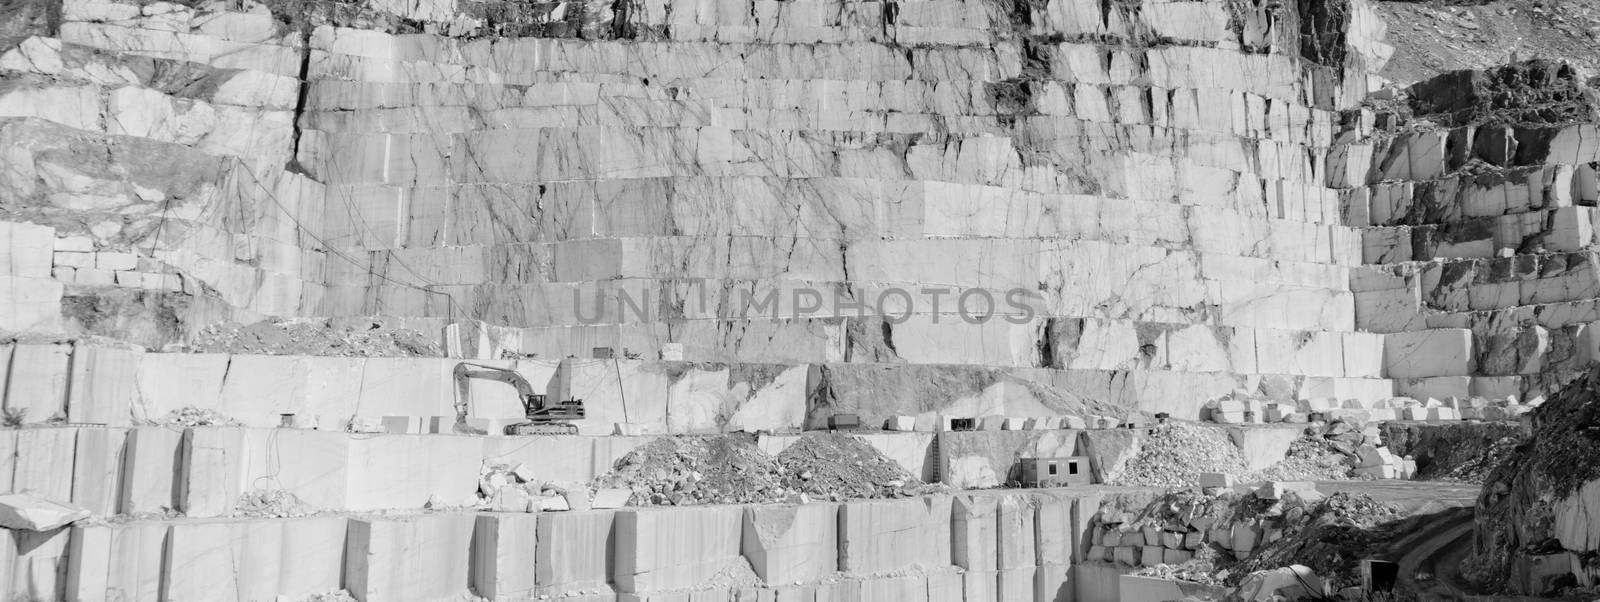 Thassos white marble quarry in bw by NagyDodo